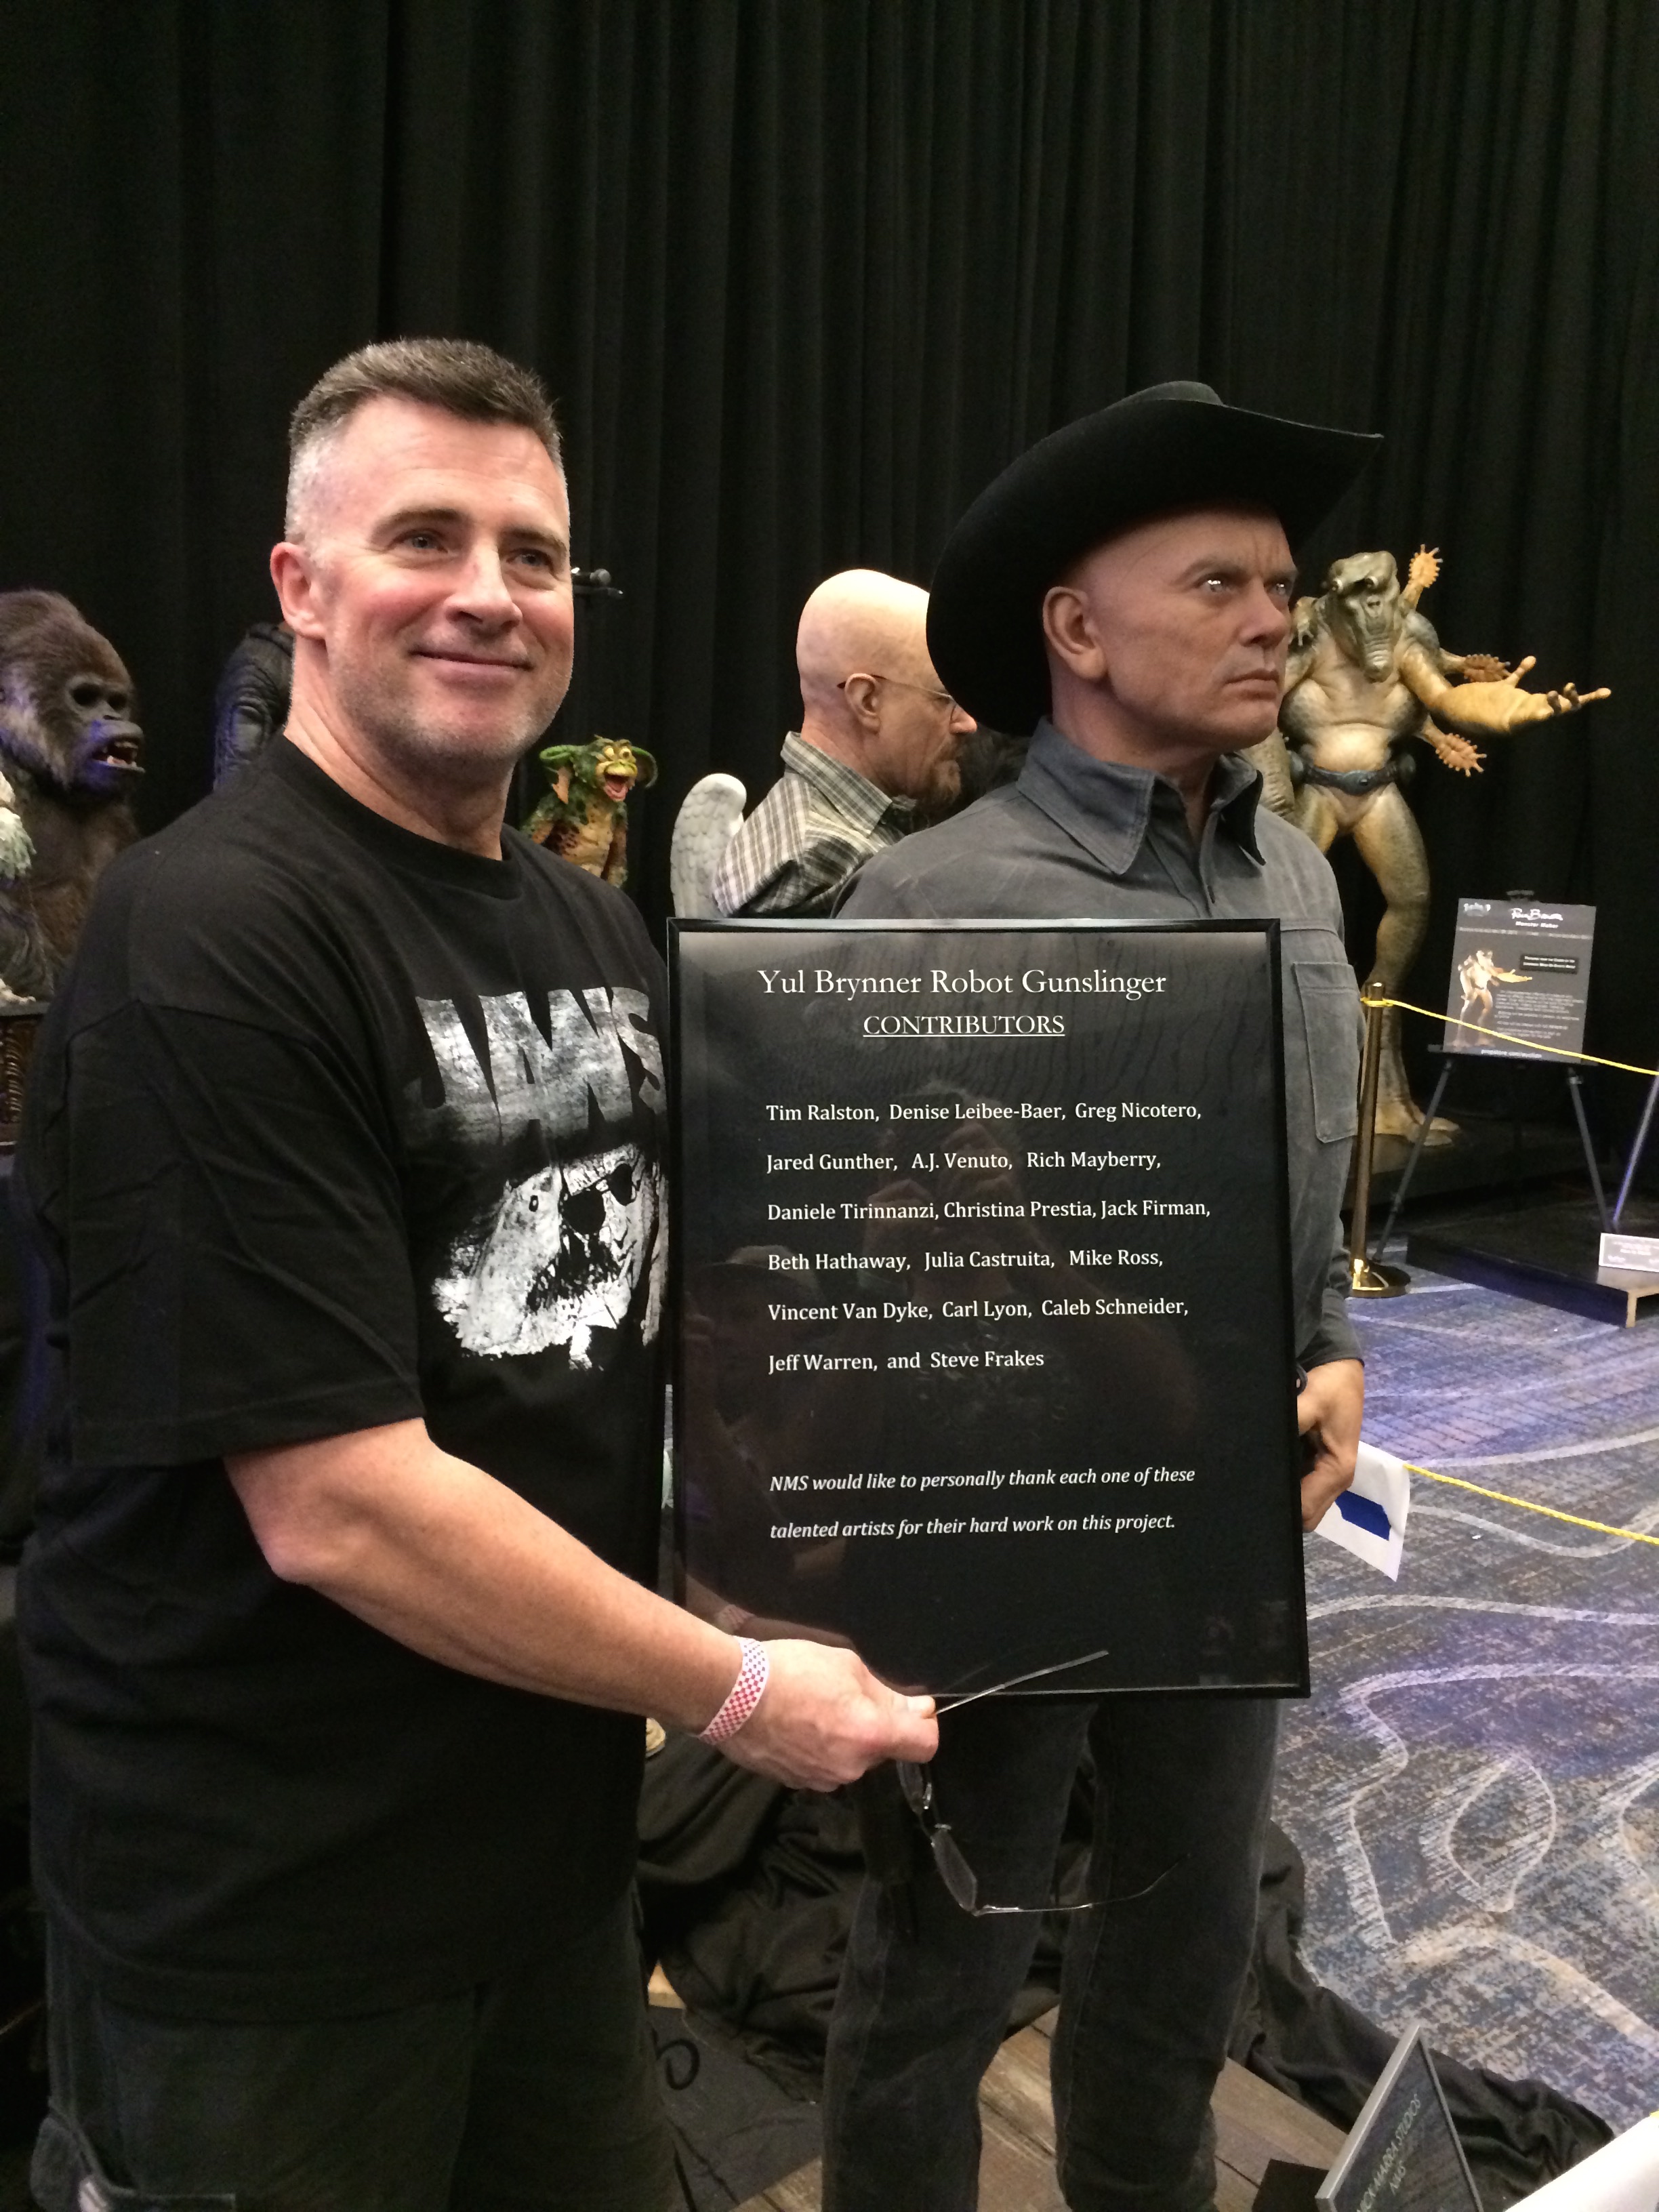 Nick Marra with his Yul Brynner Robot Gunslinger animatronic figure at MonsterPalooza 2015.